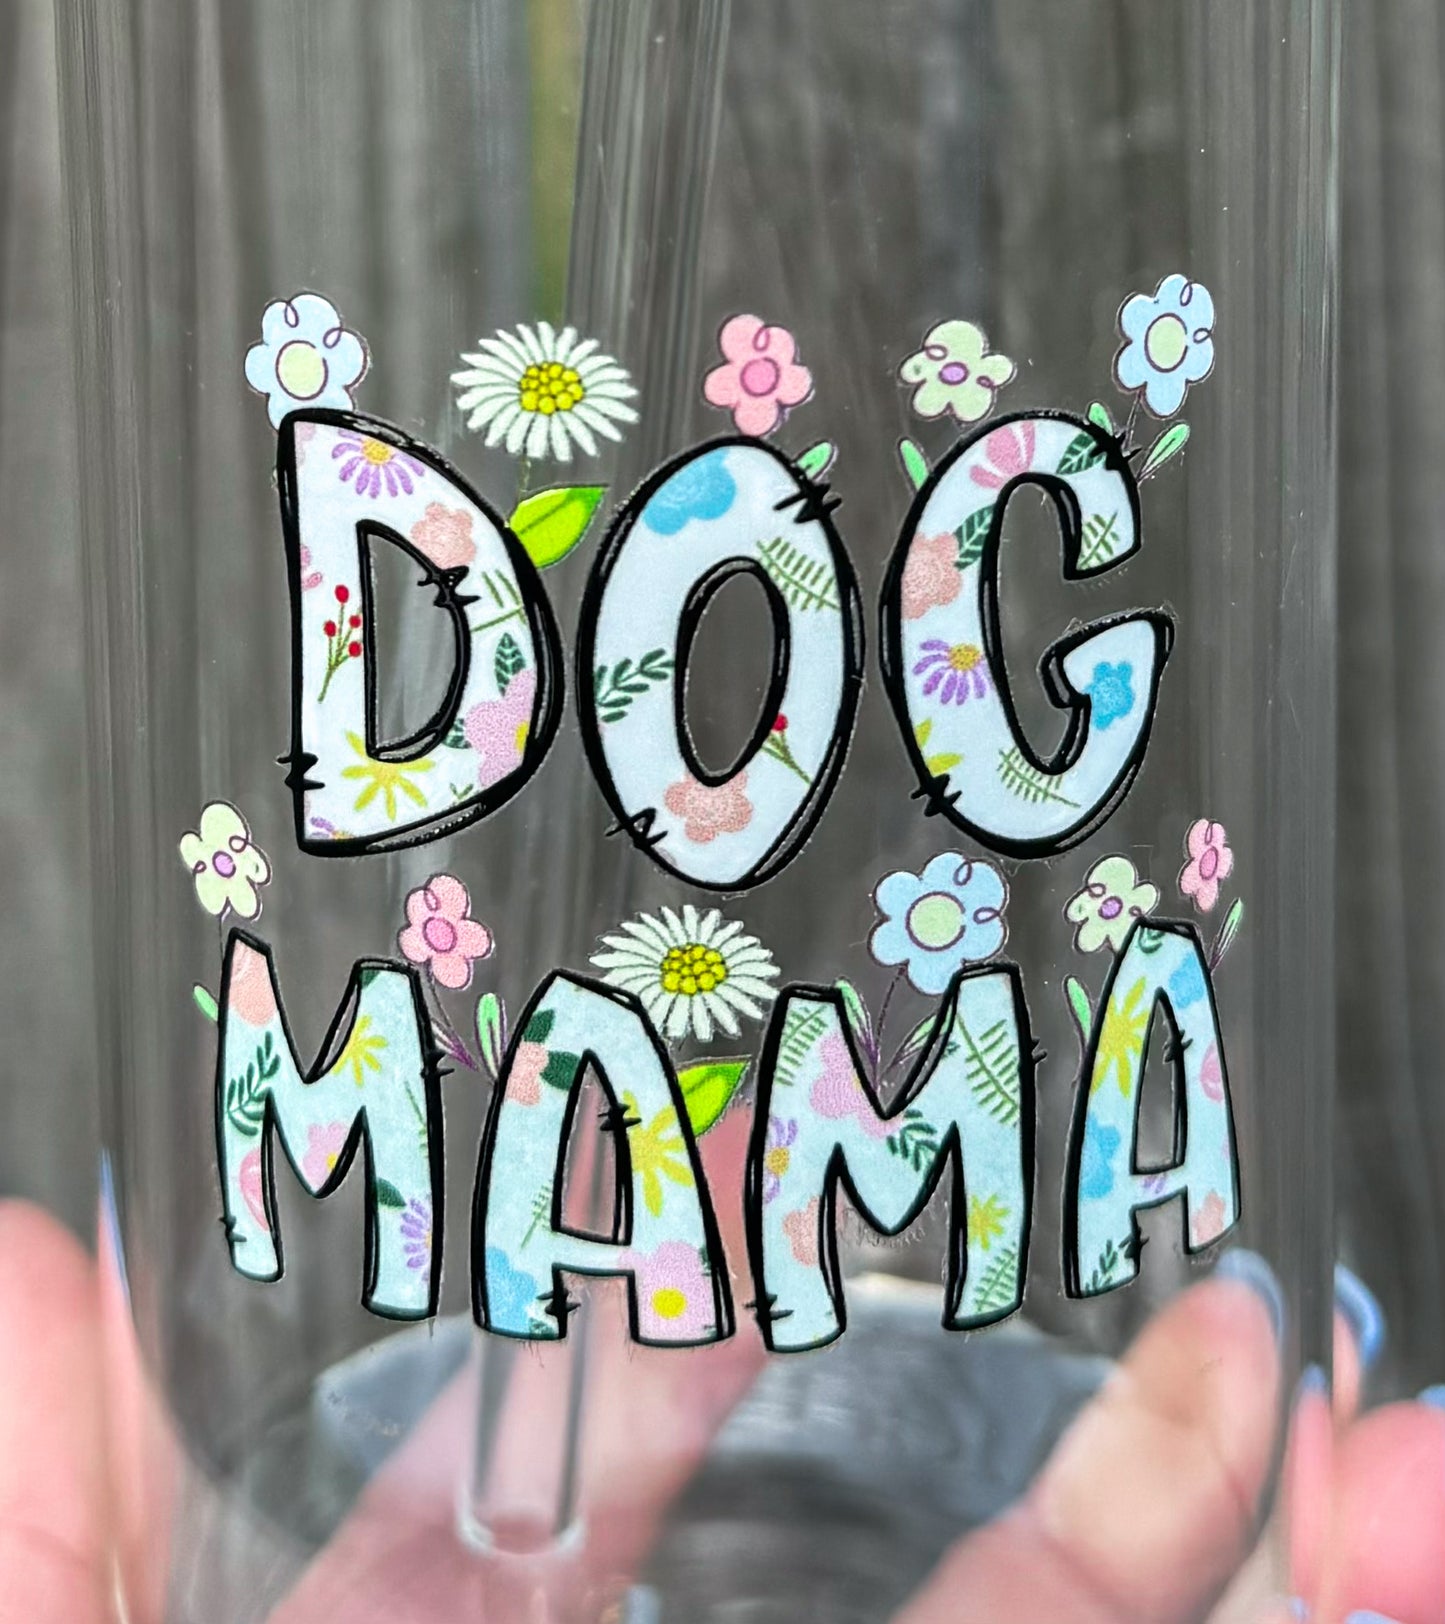 Floral Dog Mama Drinking Glass